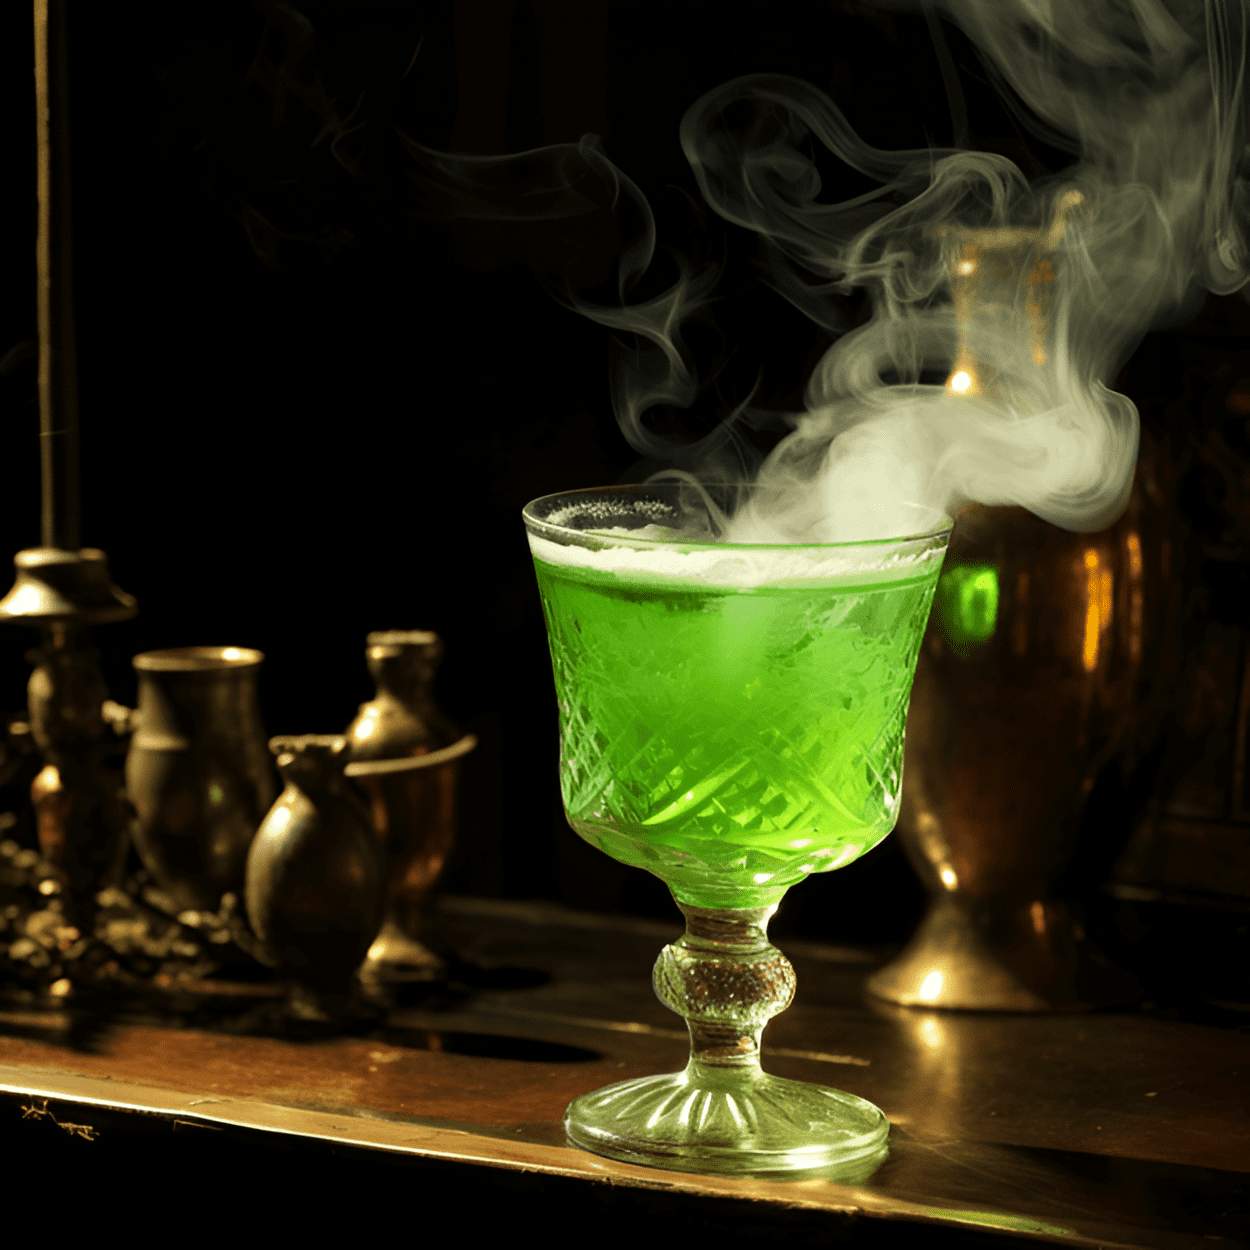 Green Fairy Cocktail Recipe - The Green Fairy is a complex cocktail with a strong, herbal flavor. It's slightly bitter due to the absinthe, but the addition of sugar and water helps to balance it out. The cocktail also has a hint of anise, giving it a refreshing, licorice-like taste.